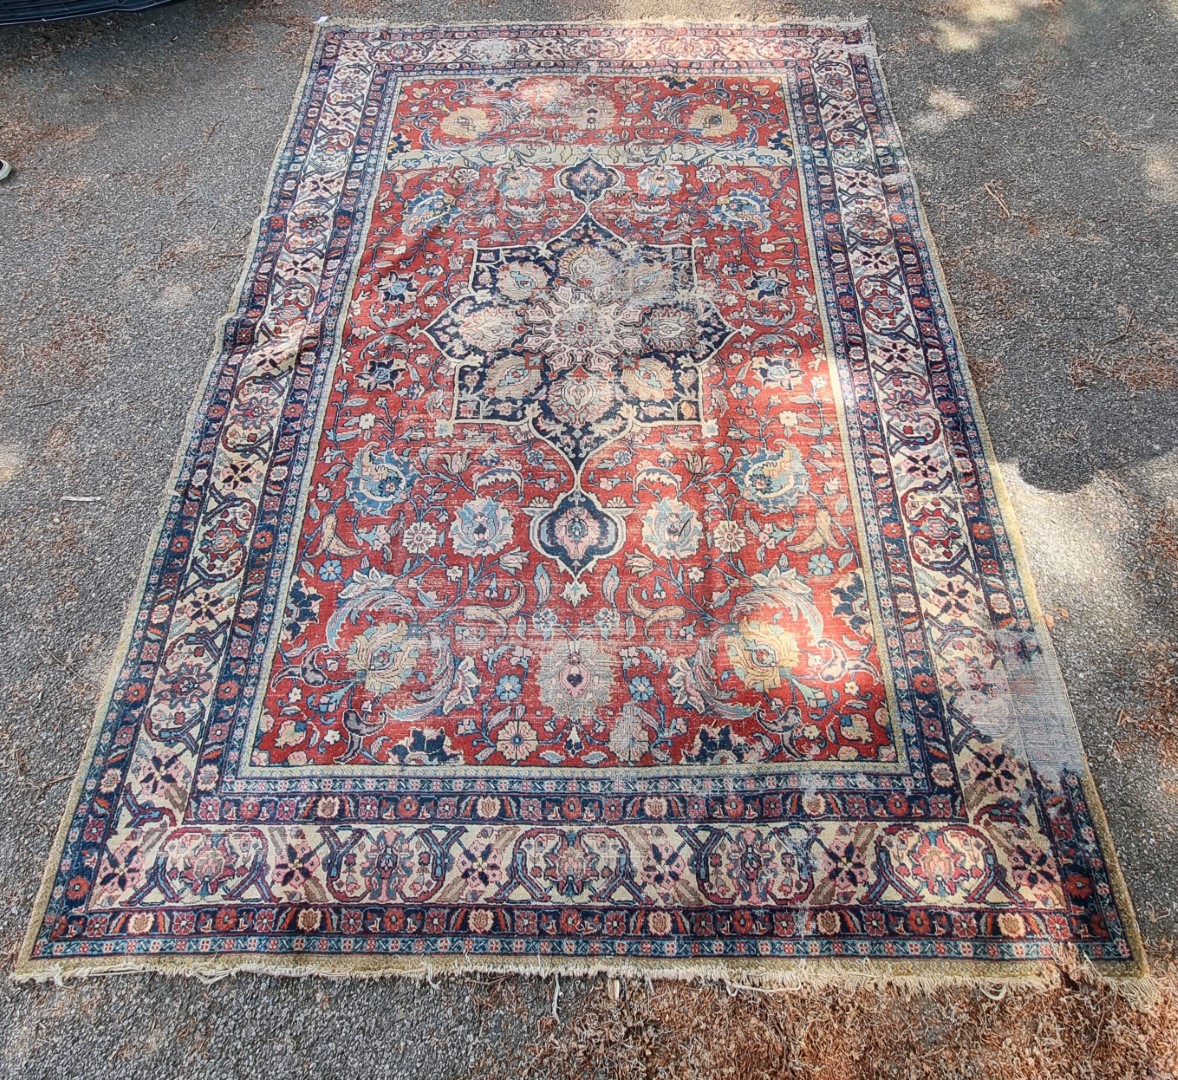 A Persian carpet, having central floral medallions, with floral cartouches to each corner of central